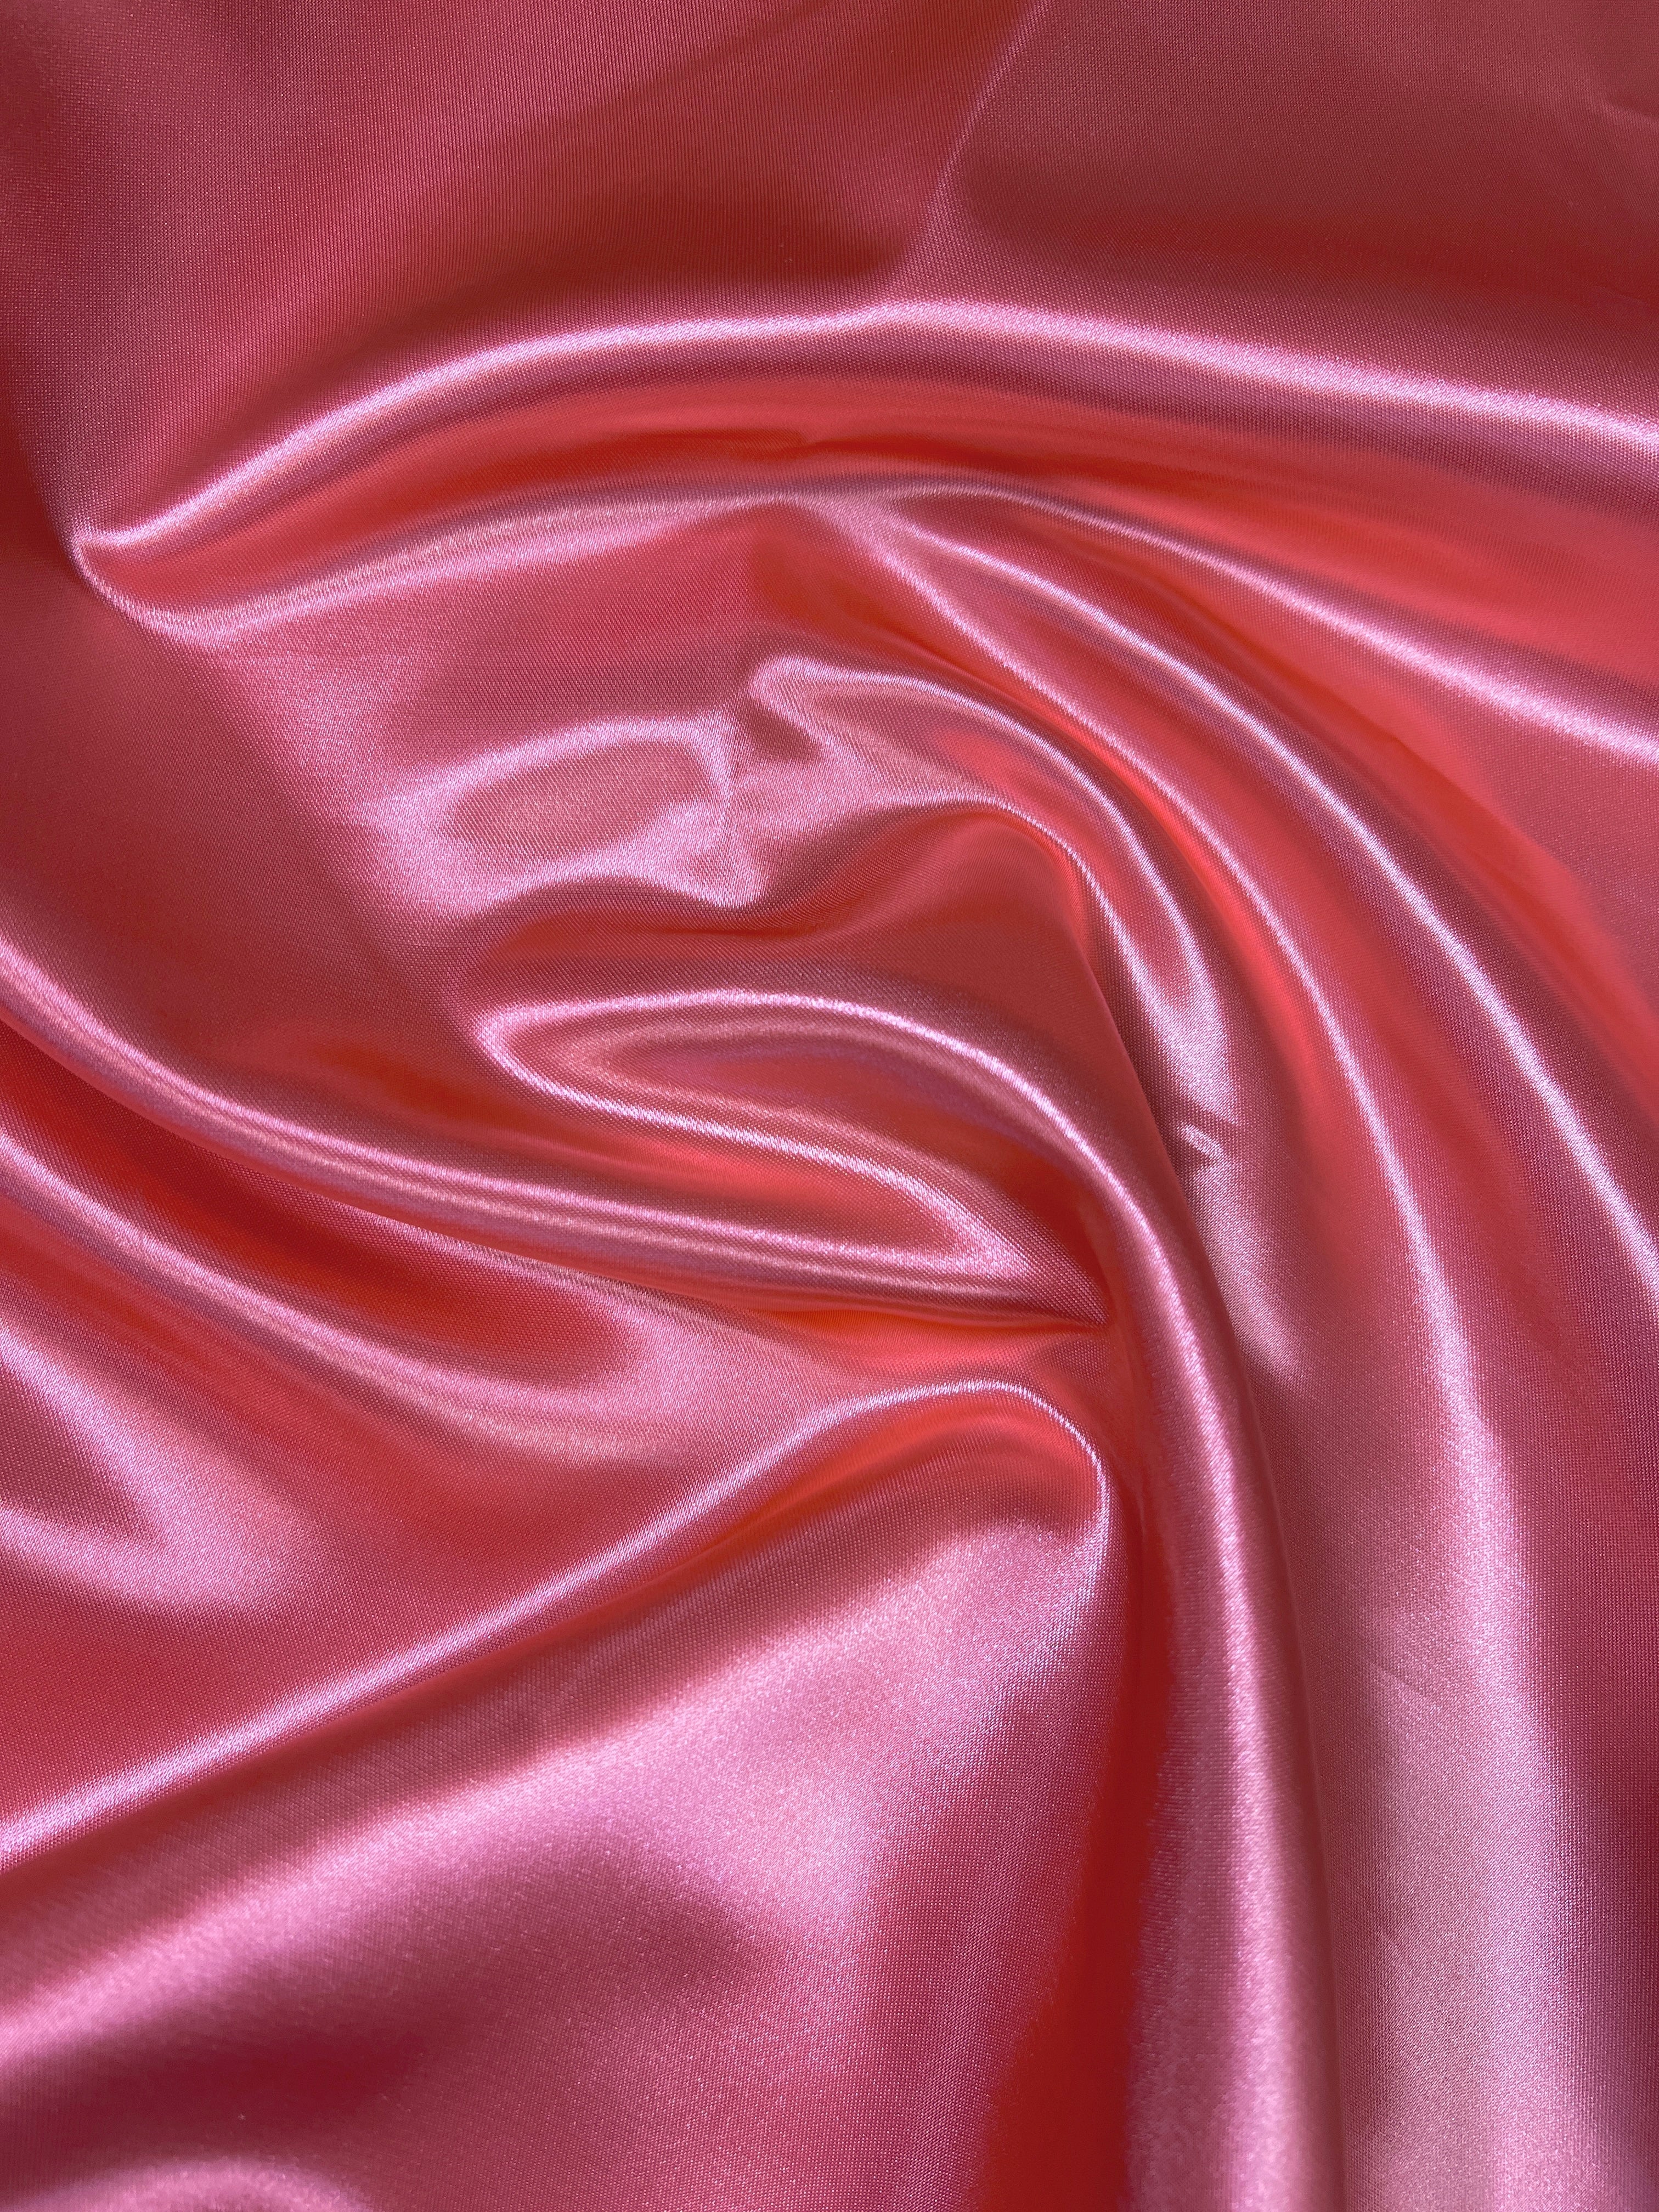 Coral Duchesse Satin Fabric, Coral Bridal Shiny Satin by yard, coral Heavy Satin Fabric for Wedding Dress, satin for woman, coral duchesse color satin, premium quality satin, best satin, cheap satin, satin usa, buy satin online, luxury satin, pink duchesse satin, hot pink color fabric, liliac pink color fabric for dress, light pink color fabric, kiki textiles